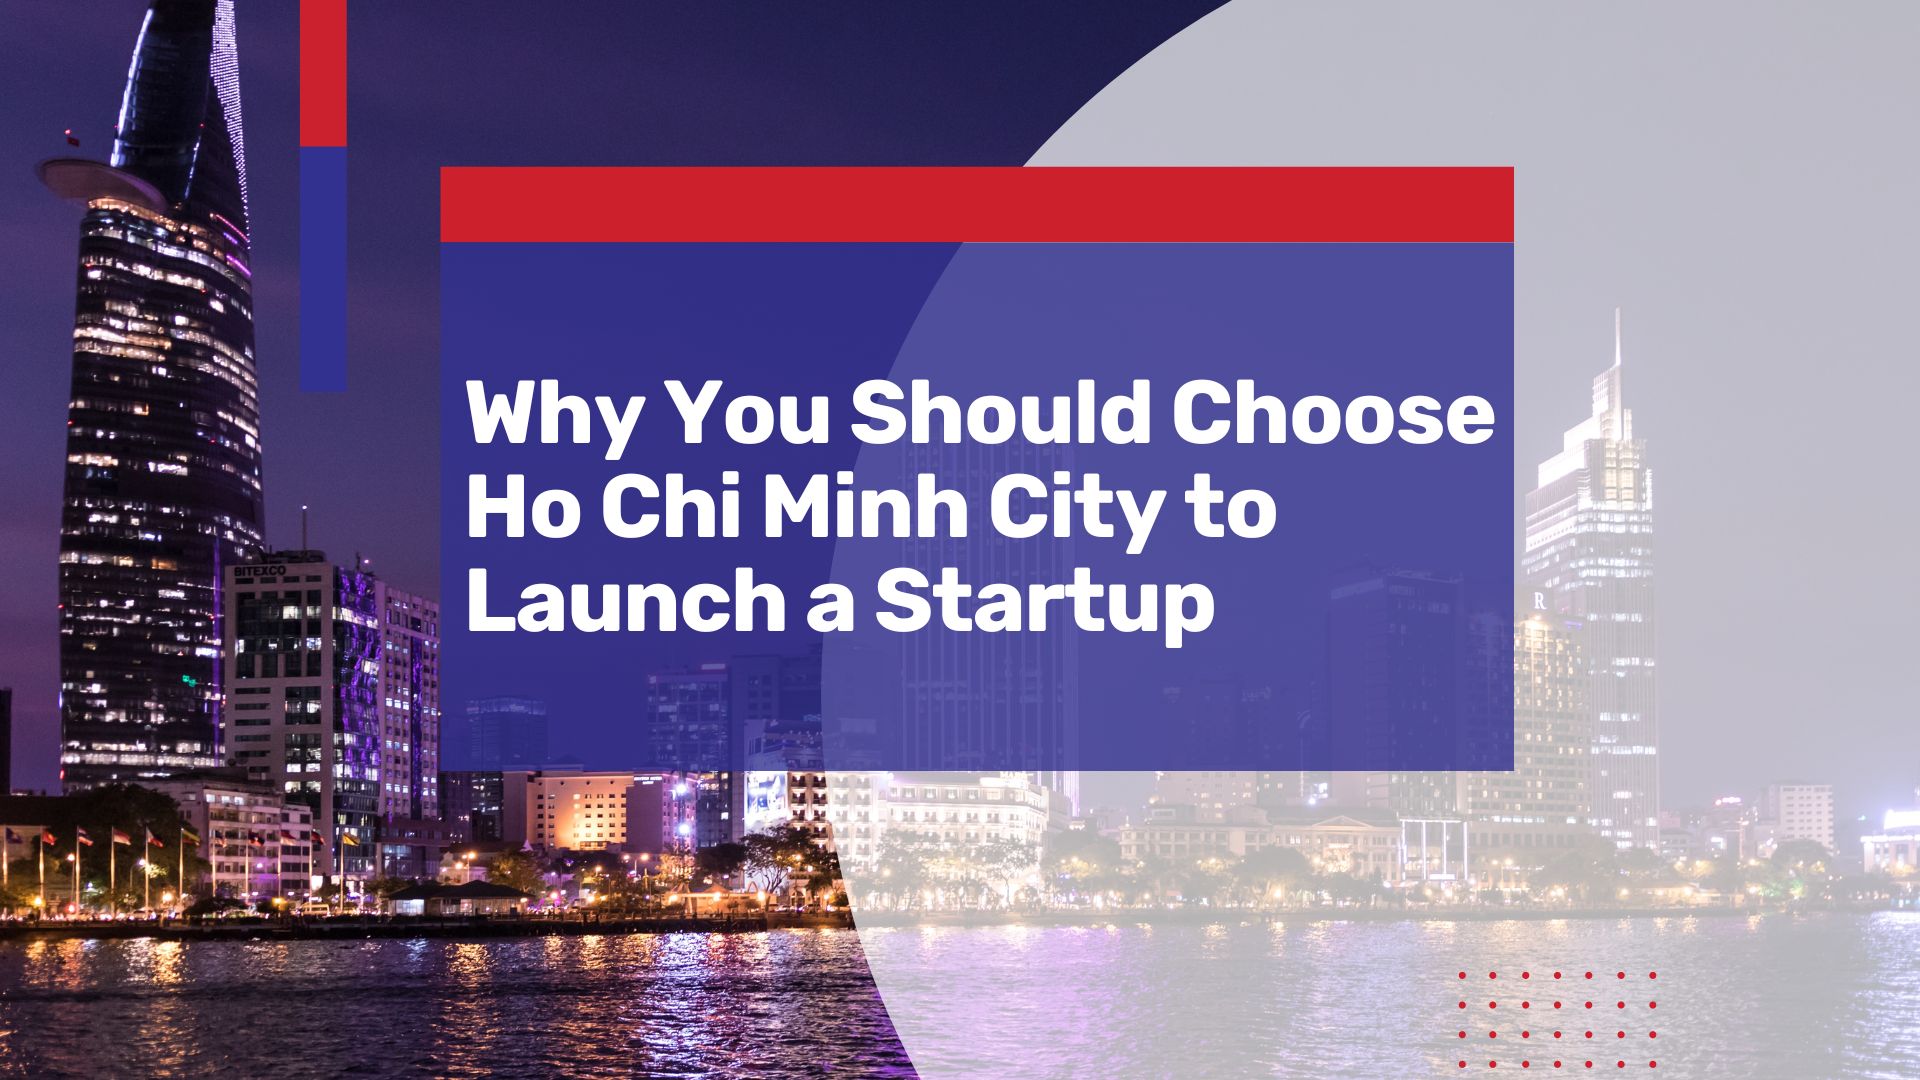 Here are 9 Reasons to Choose Ho Chi Minh City (Vietnam) to Launch Your Startup